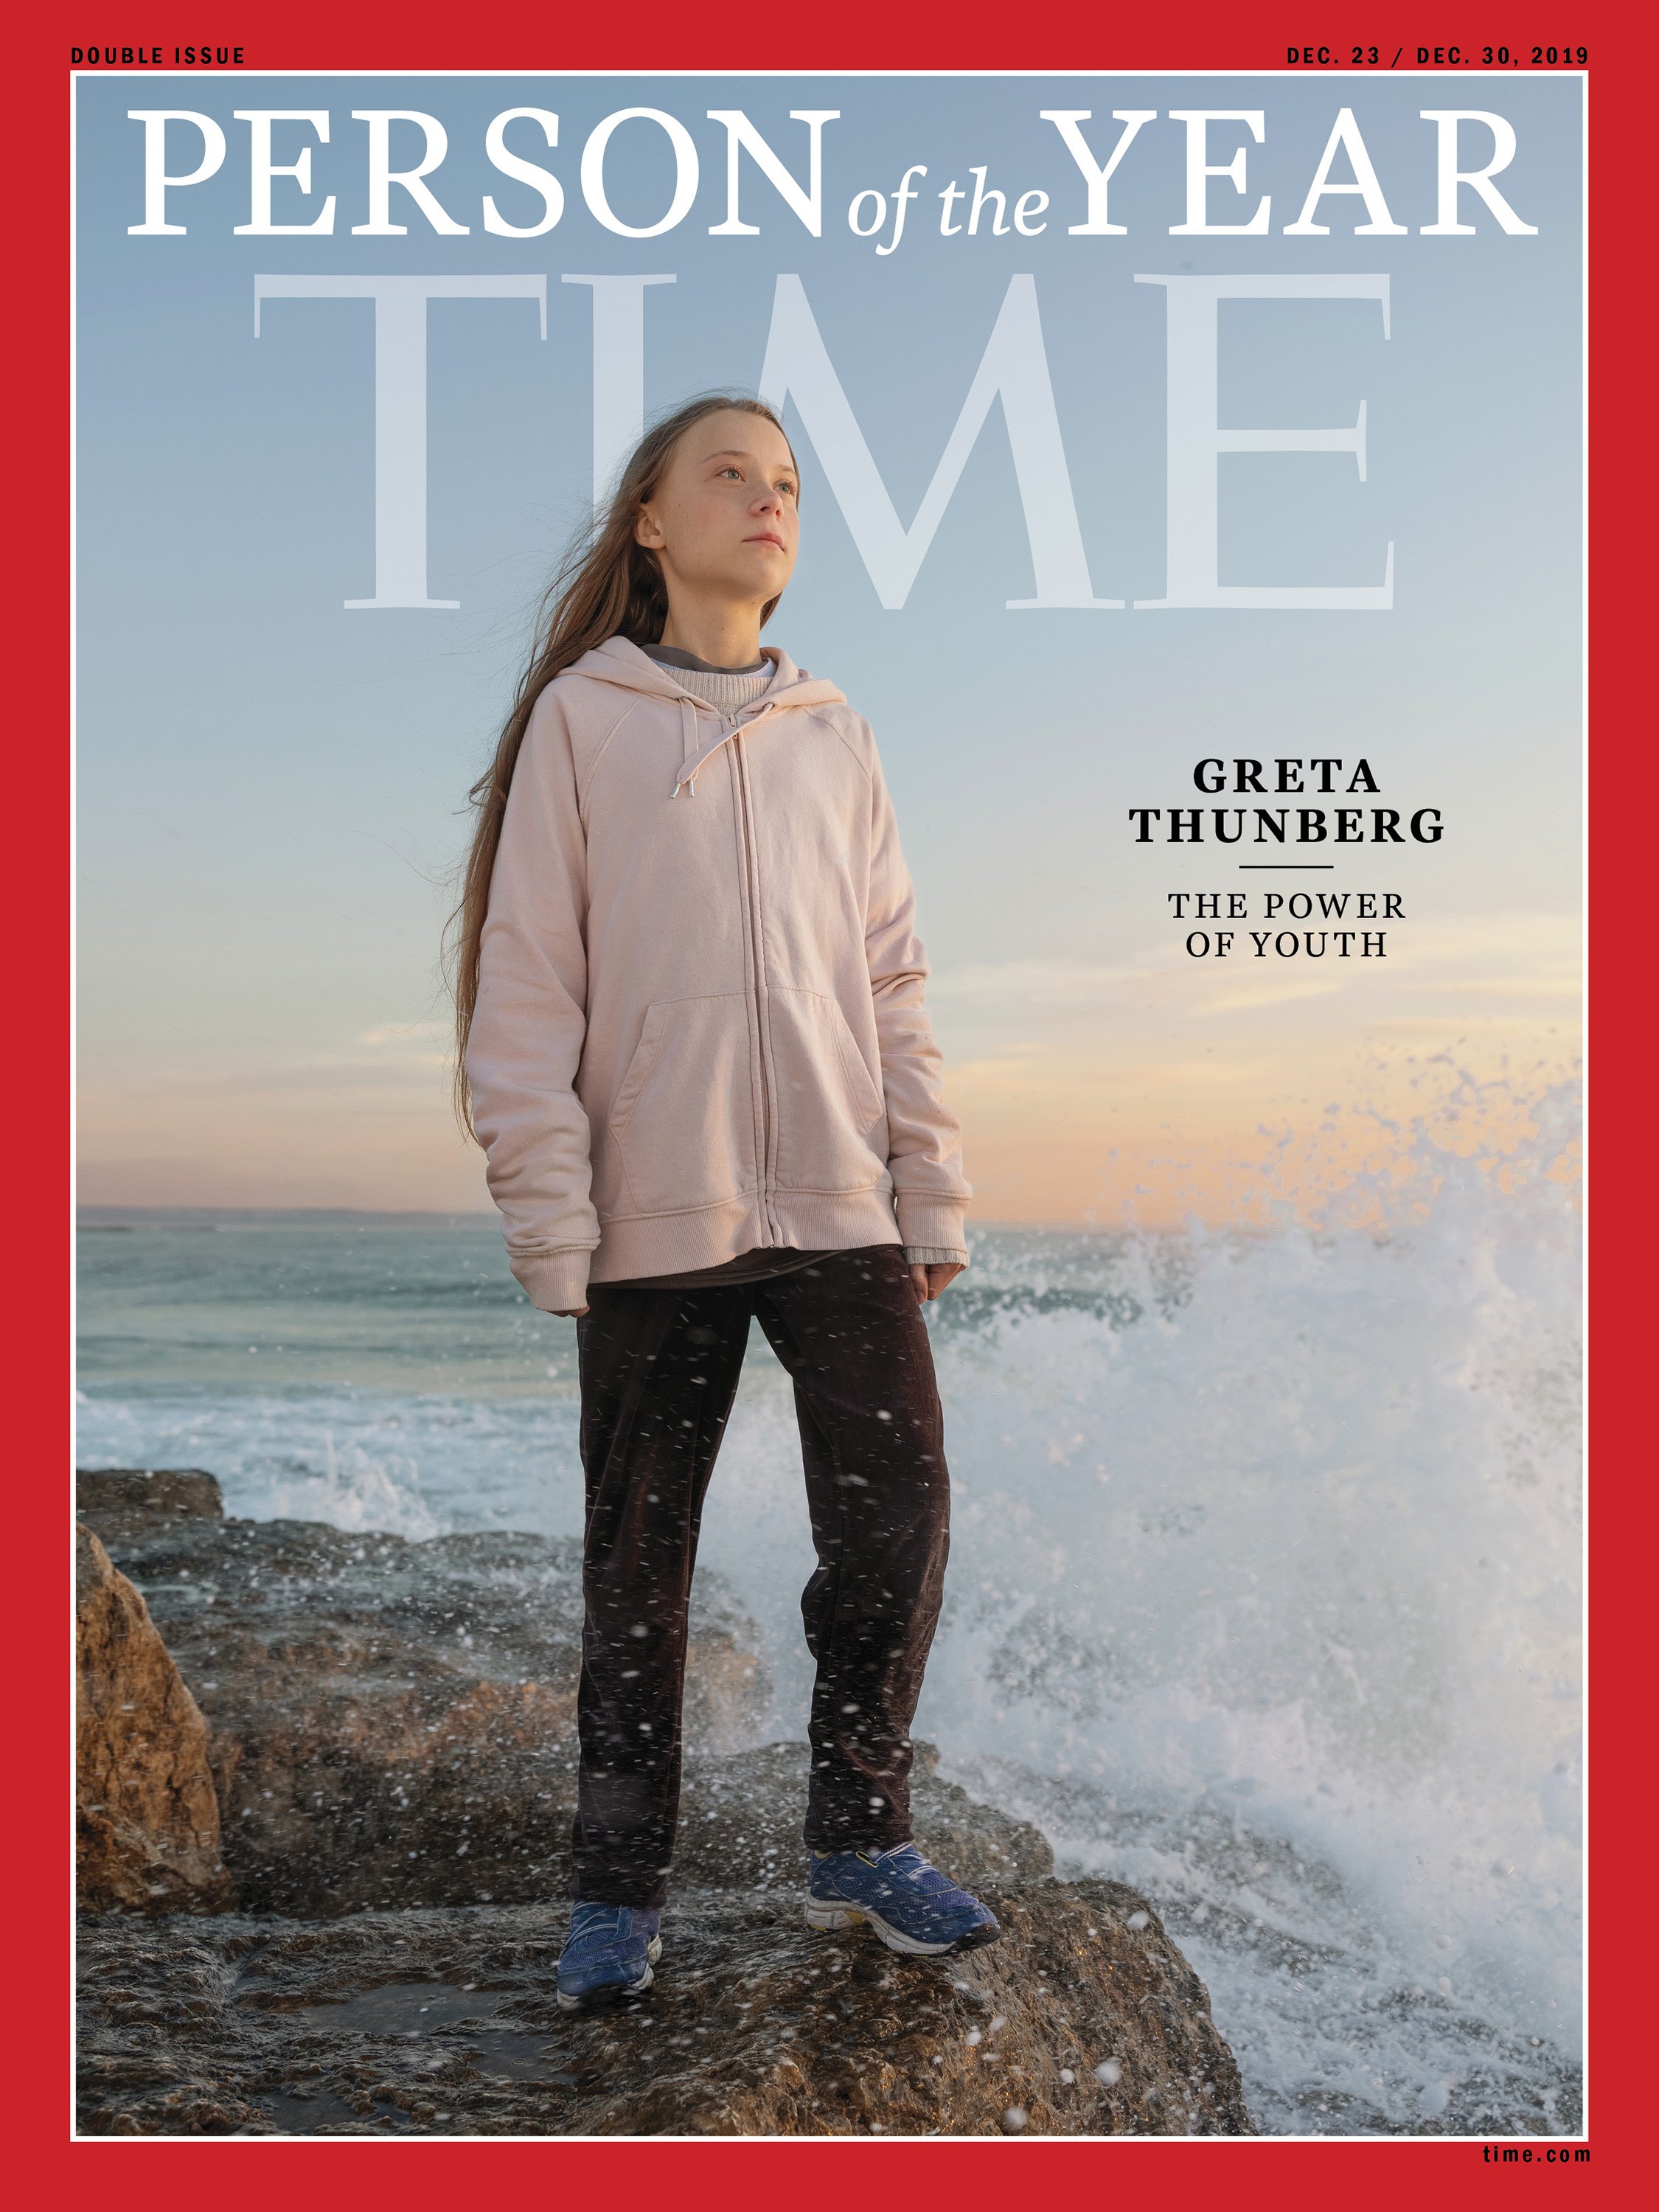 Thunberg 'a bit surprised' to be Time 'Person of the Year' - The Associated Press